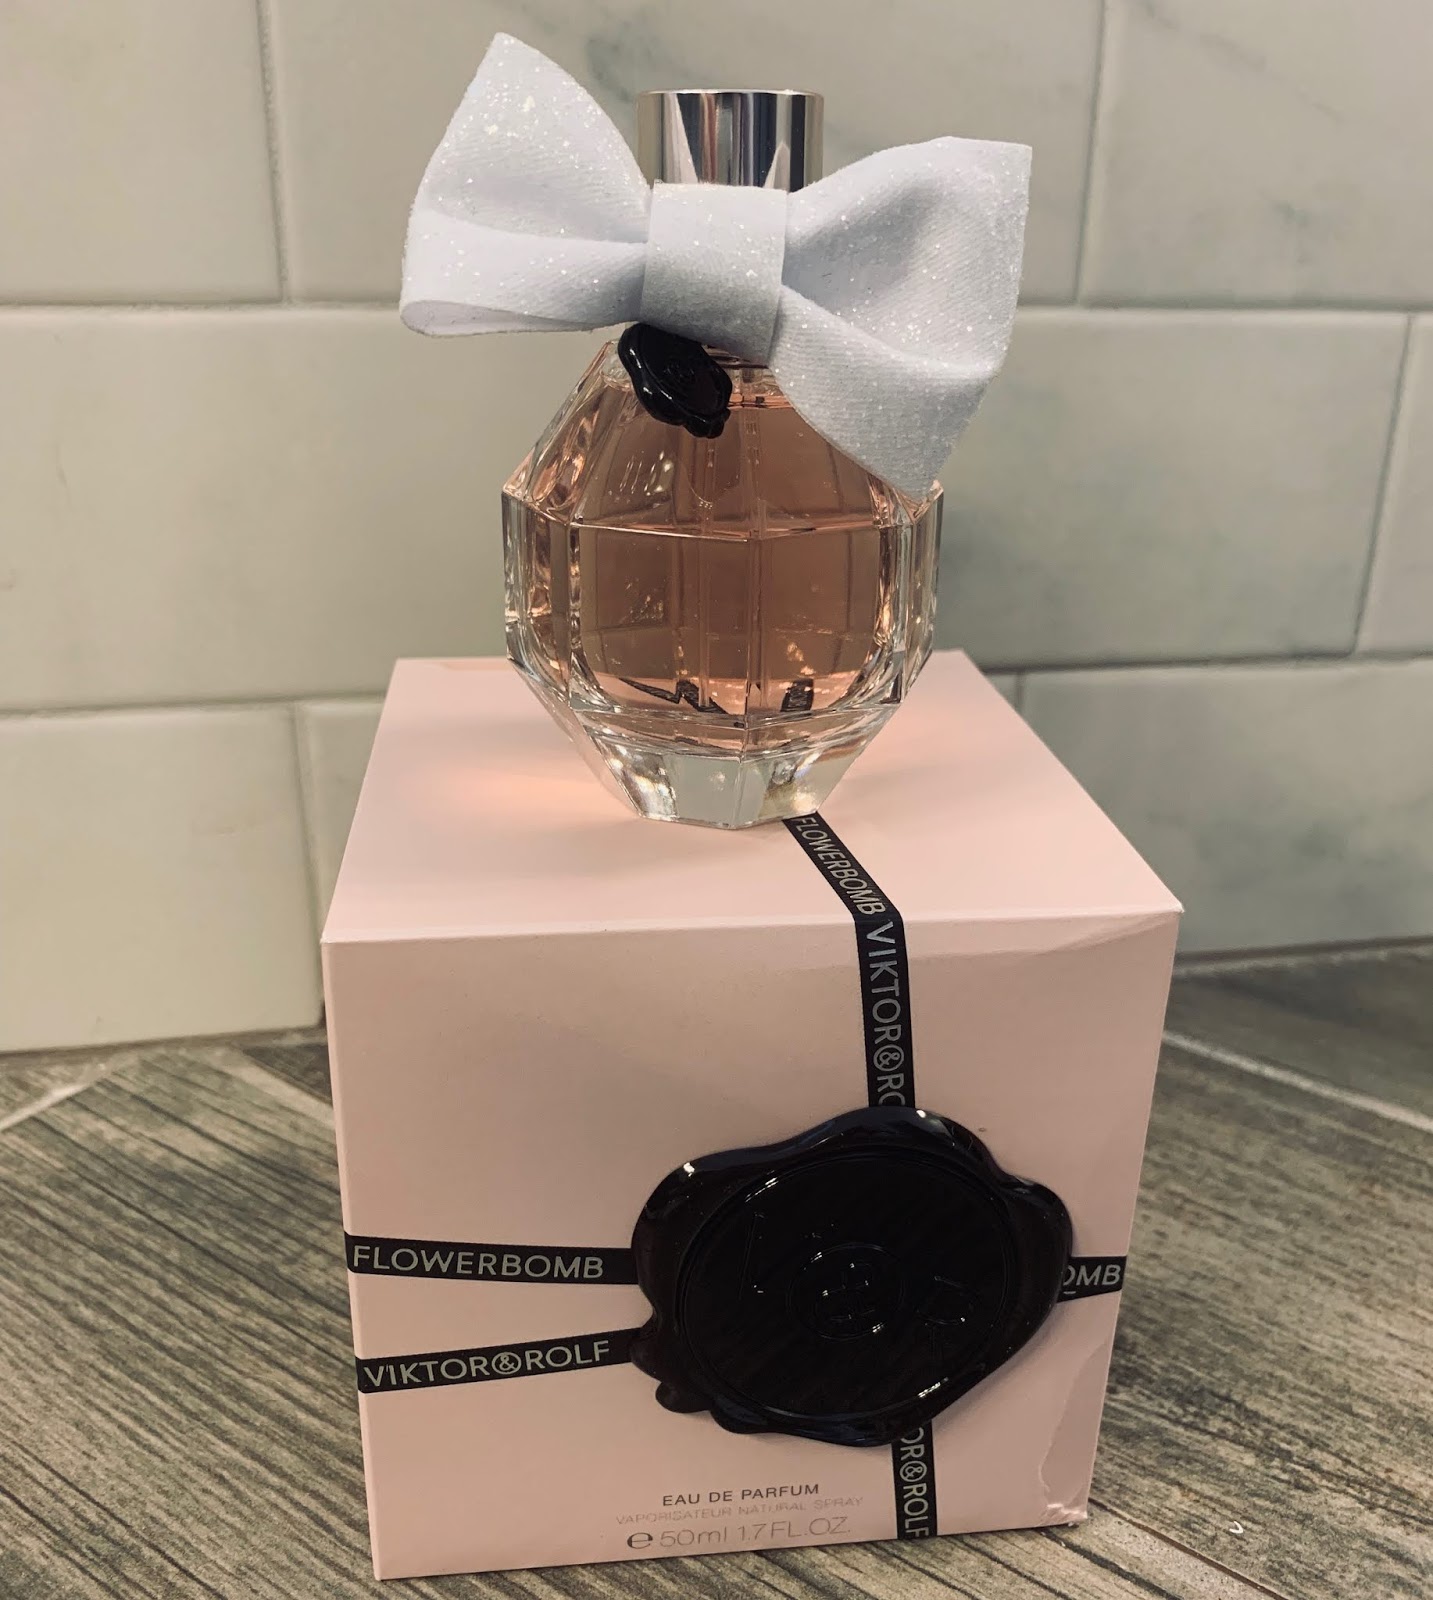 Pammy Blogs Beauty Fragrance Gift Idea Viktor And Rolf Personalization Factory With Flowerbomb